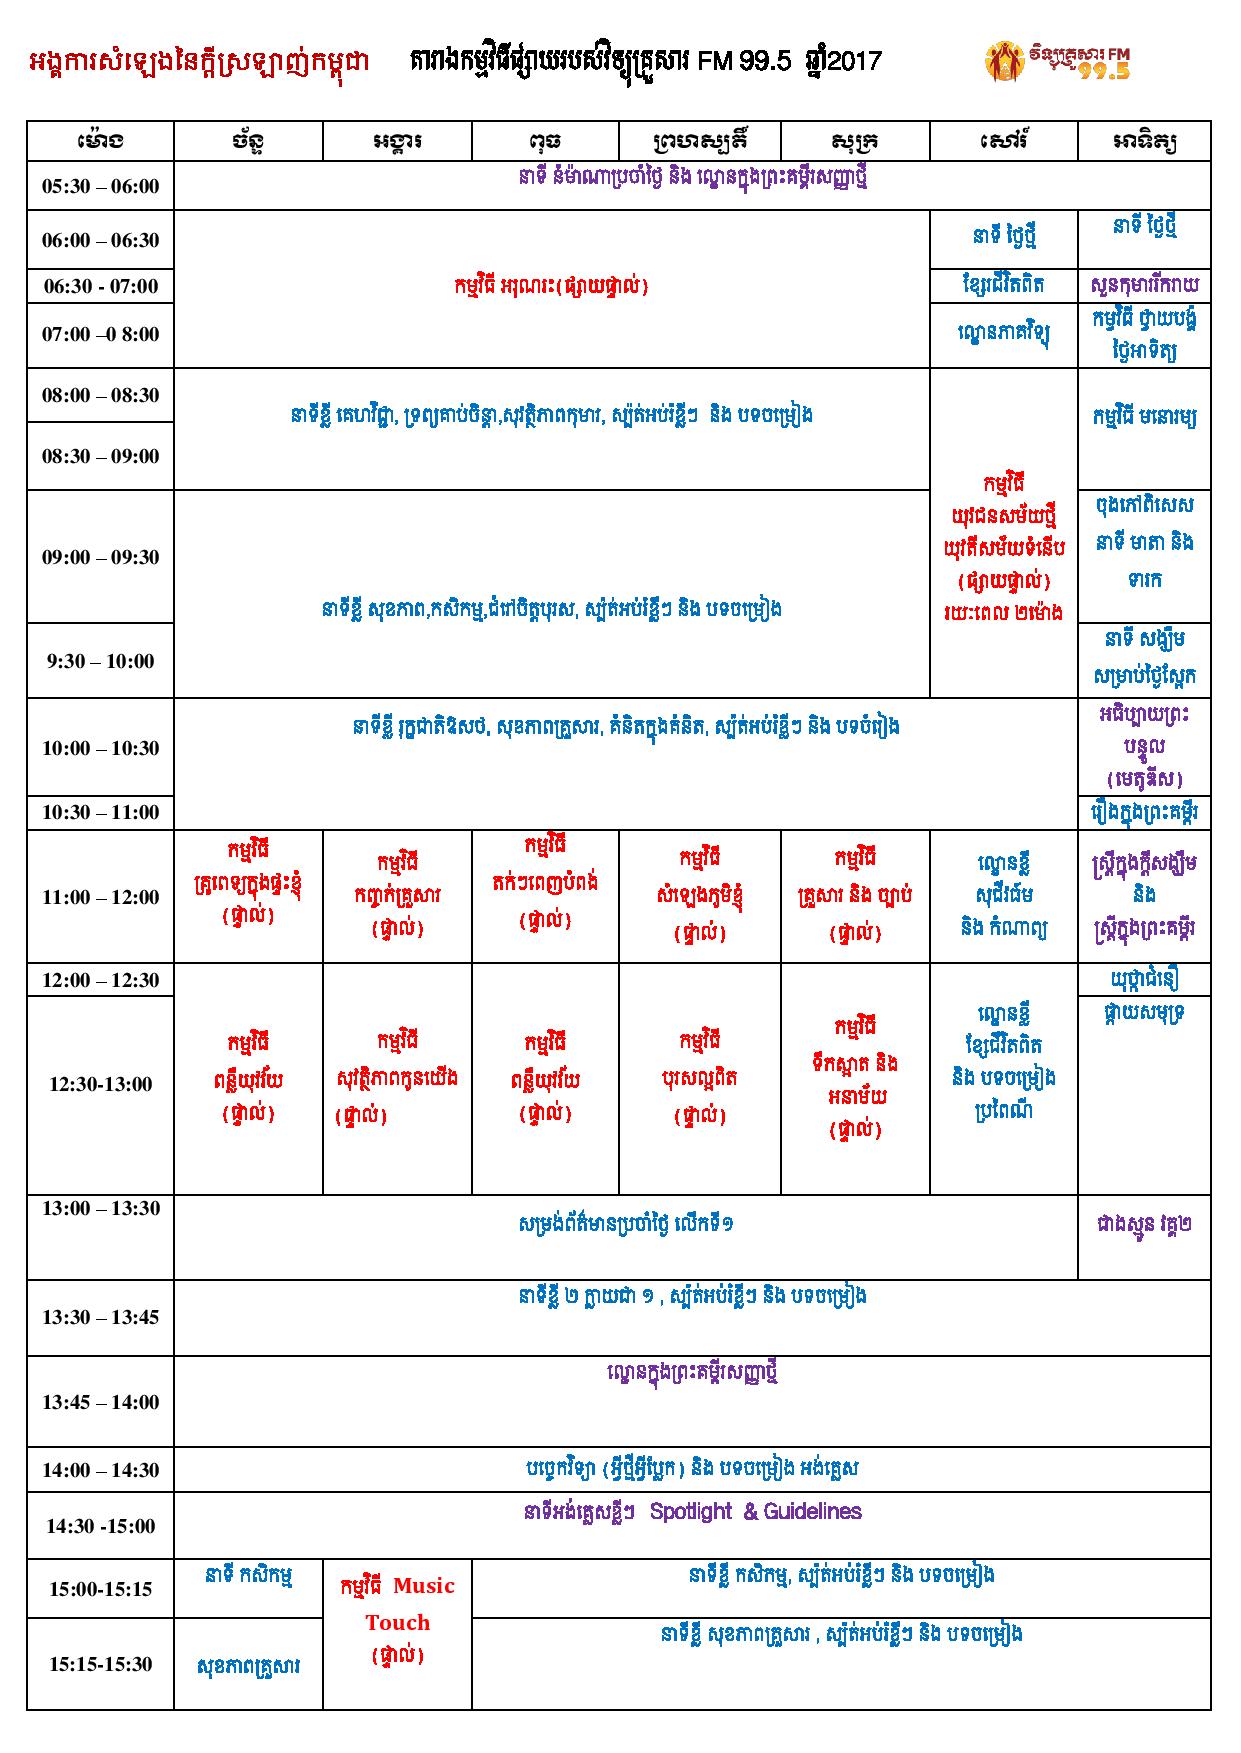 FM Schedule Khmer January 2017 Colorful page 001